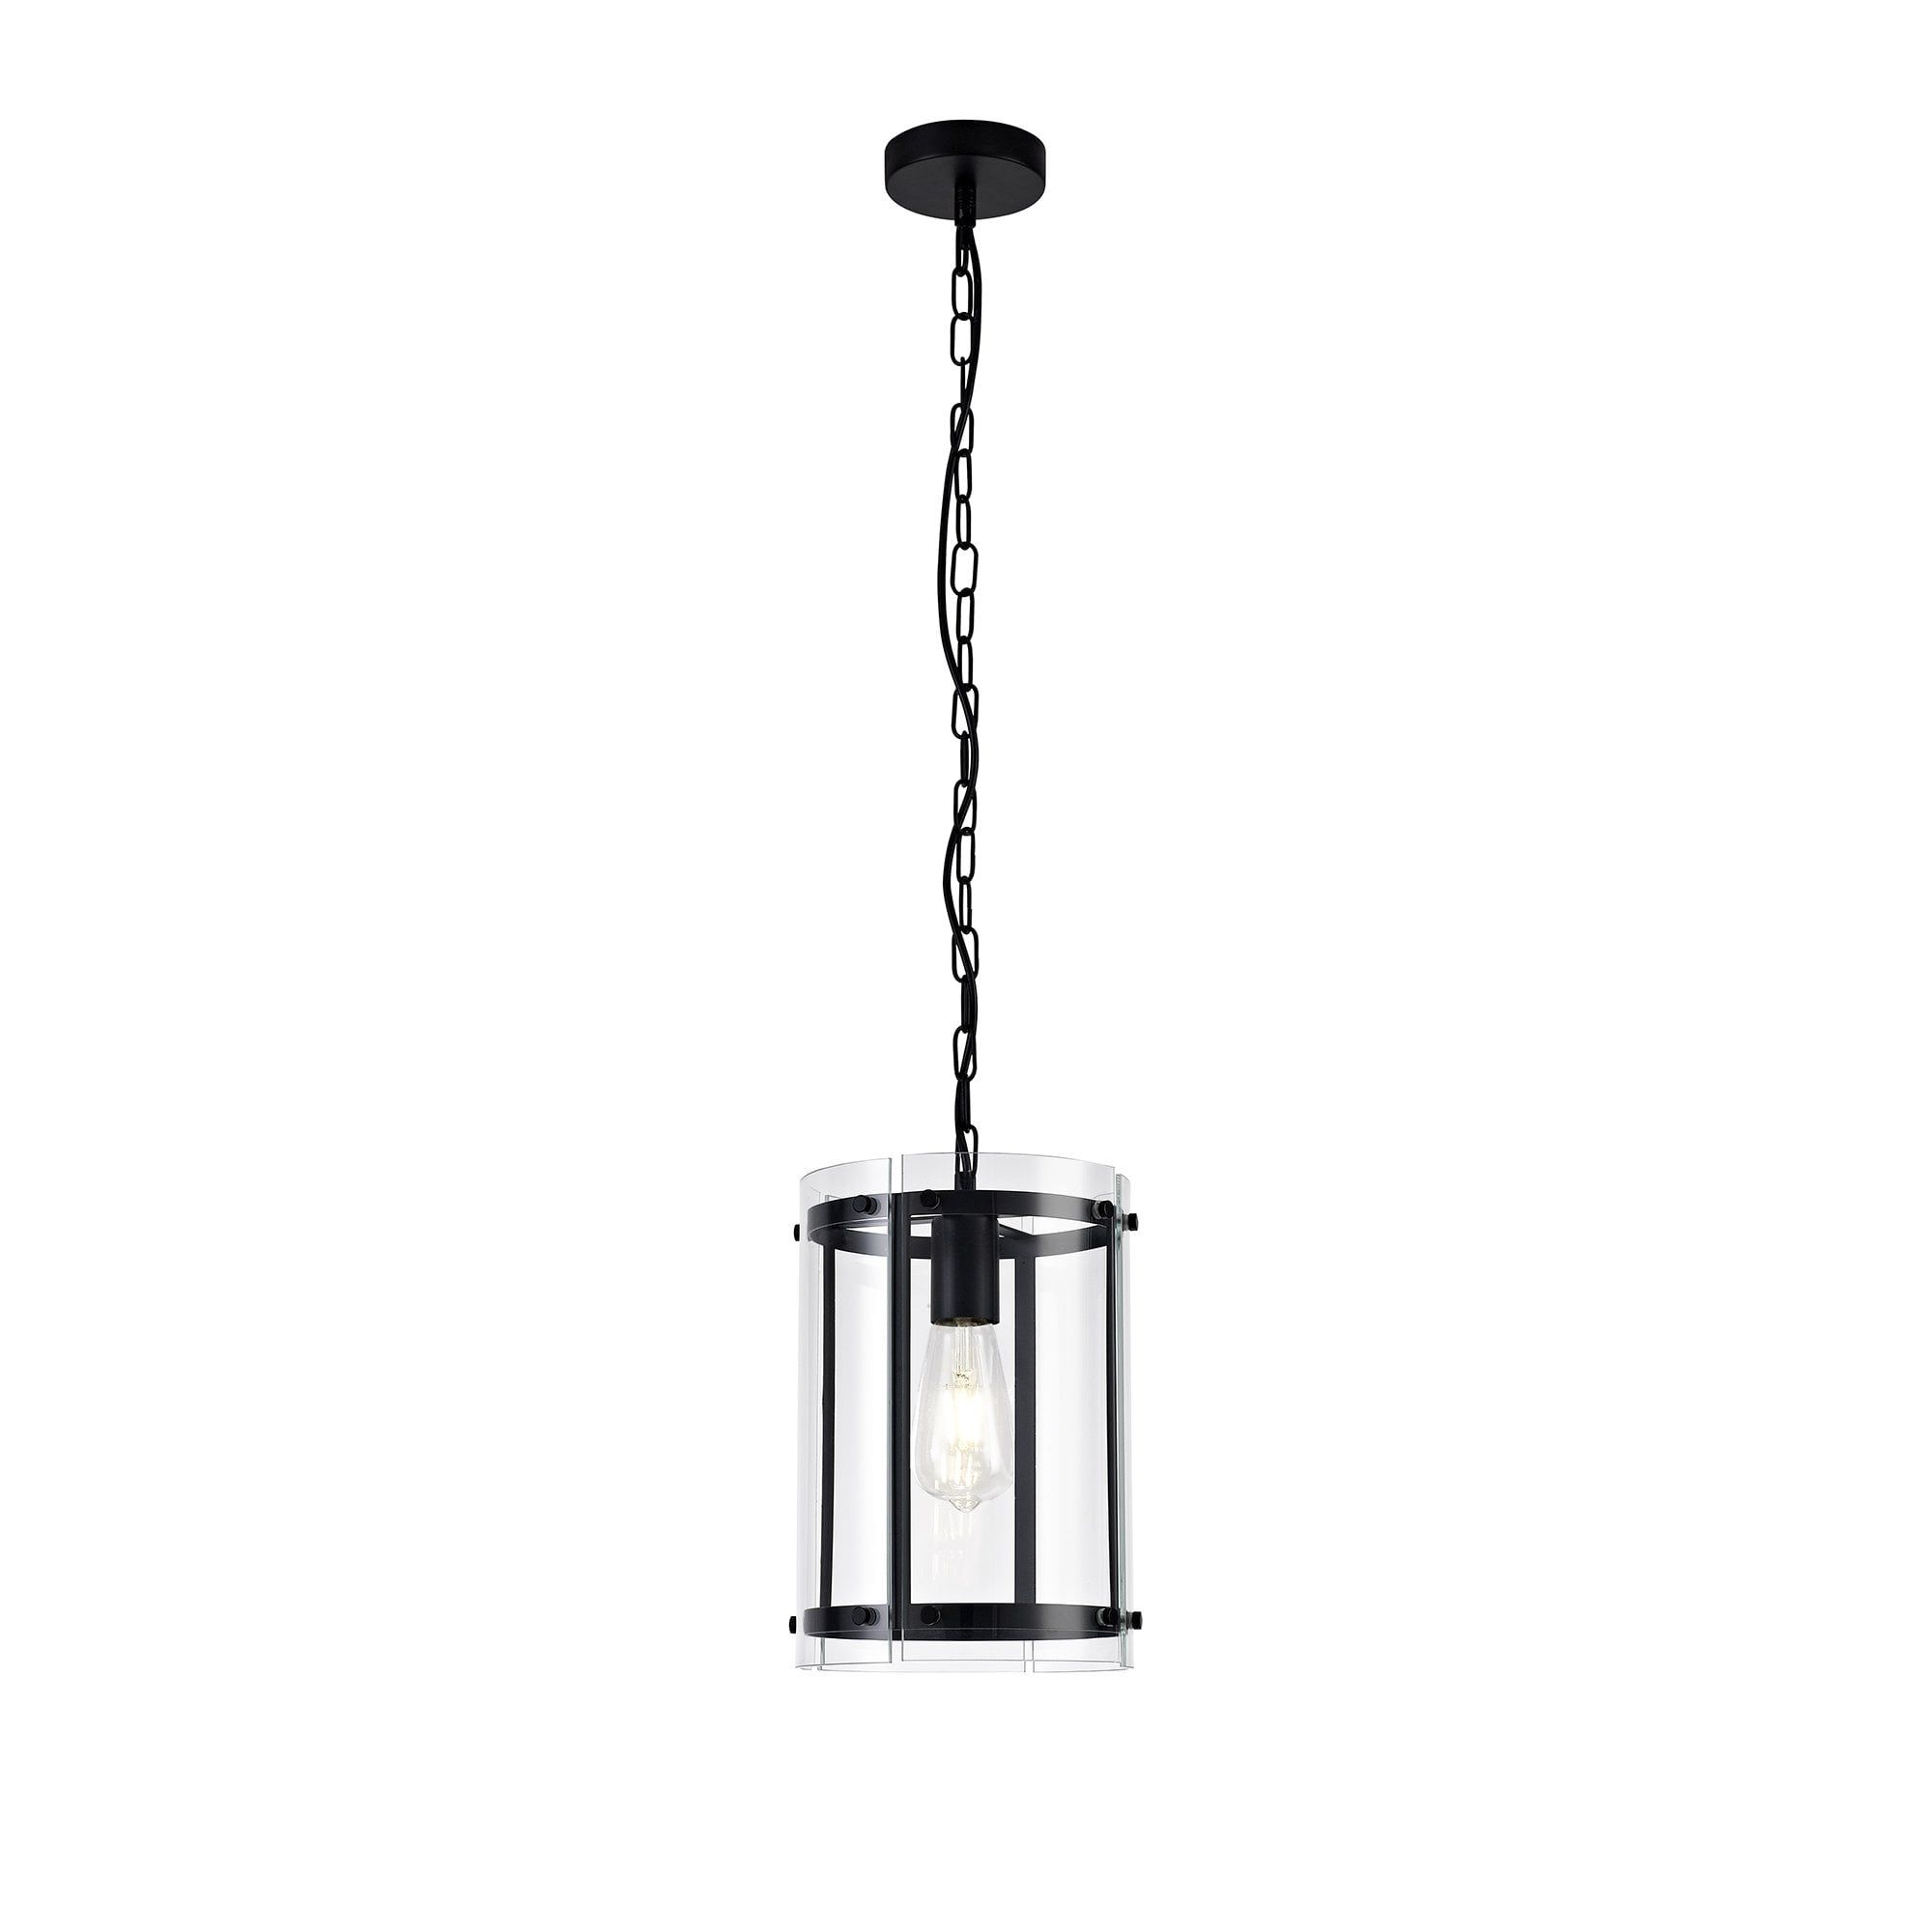 Ceiling Pendant Lantern In Matte Black With Glass Panels Intended For Flat Black Lantern Chandeliers (View 12 of 15)